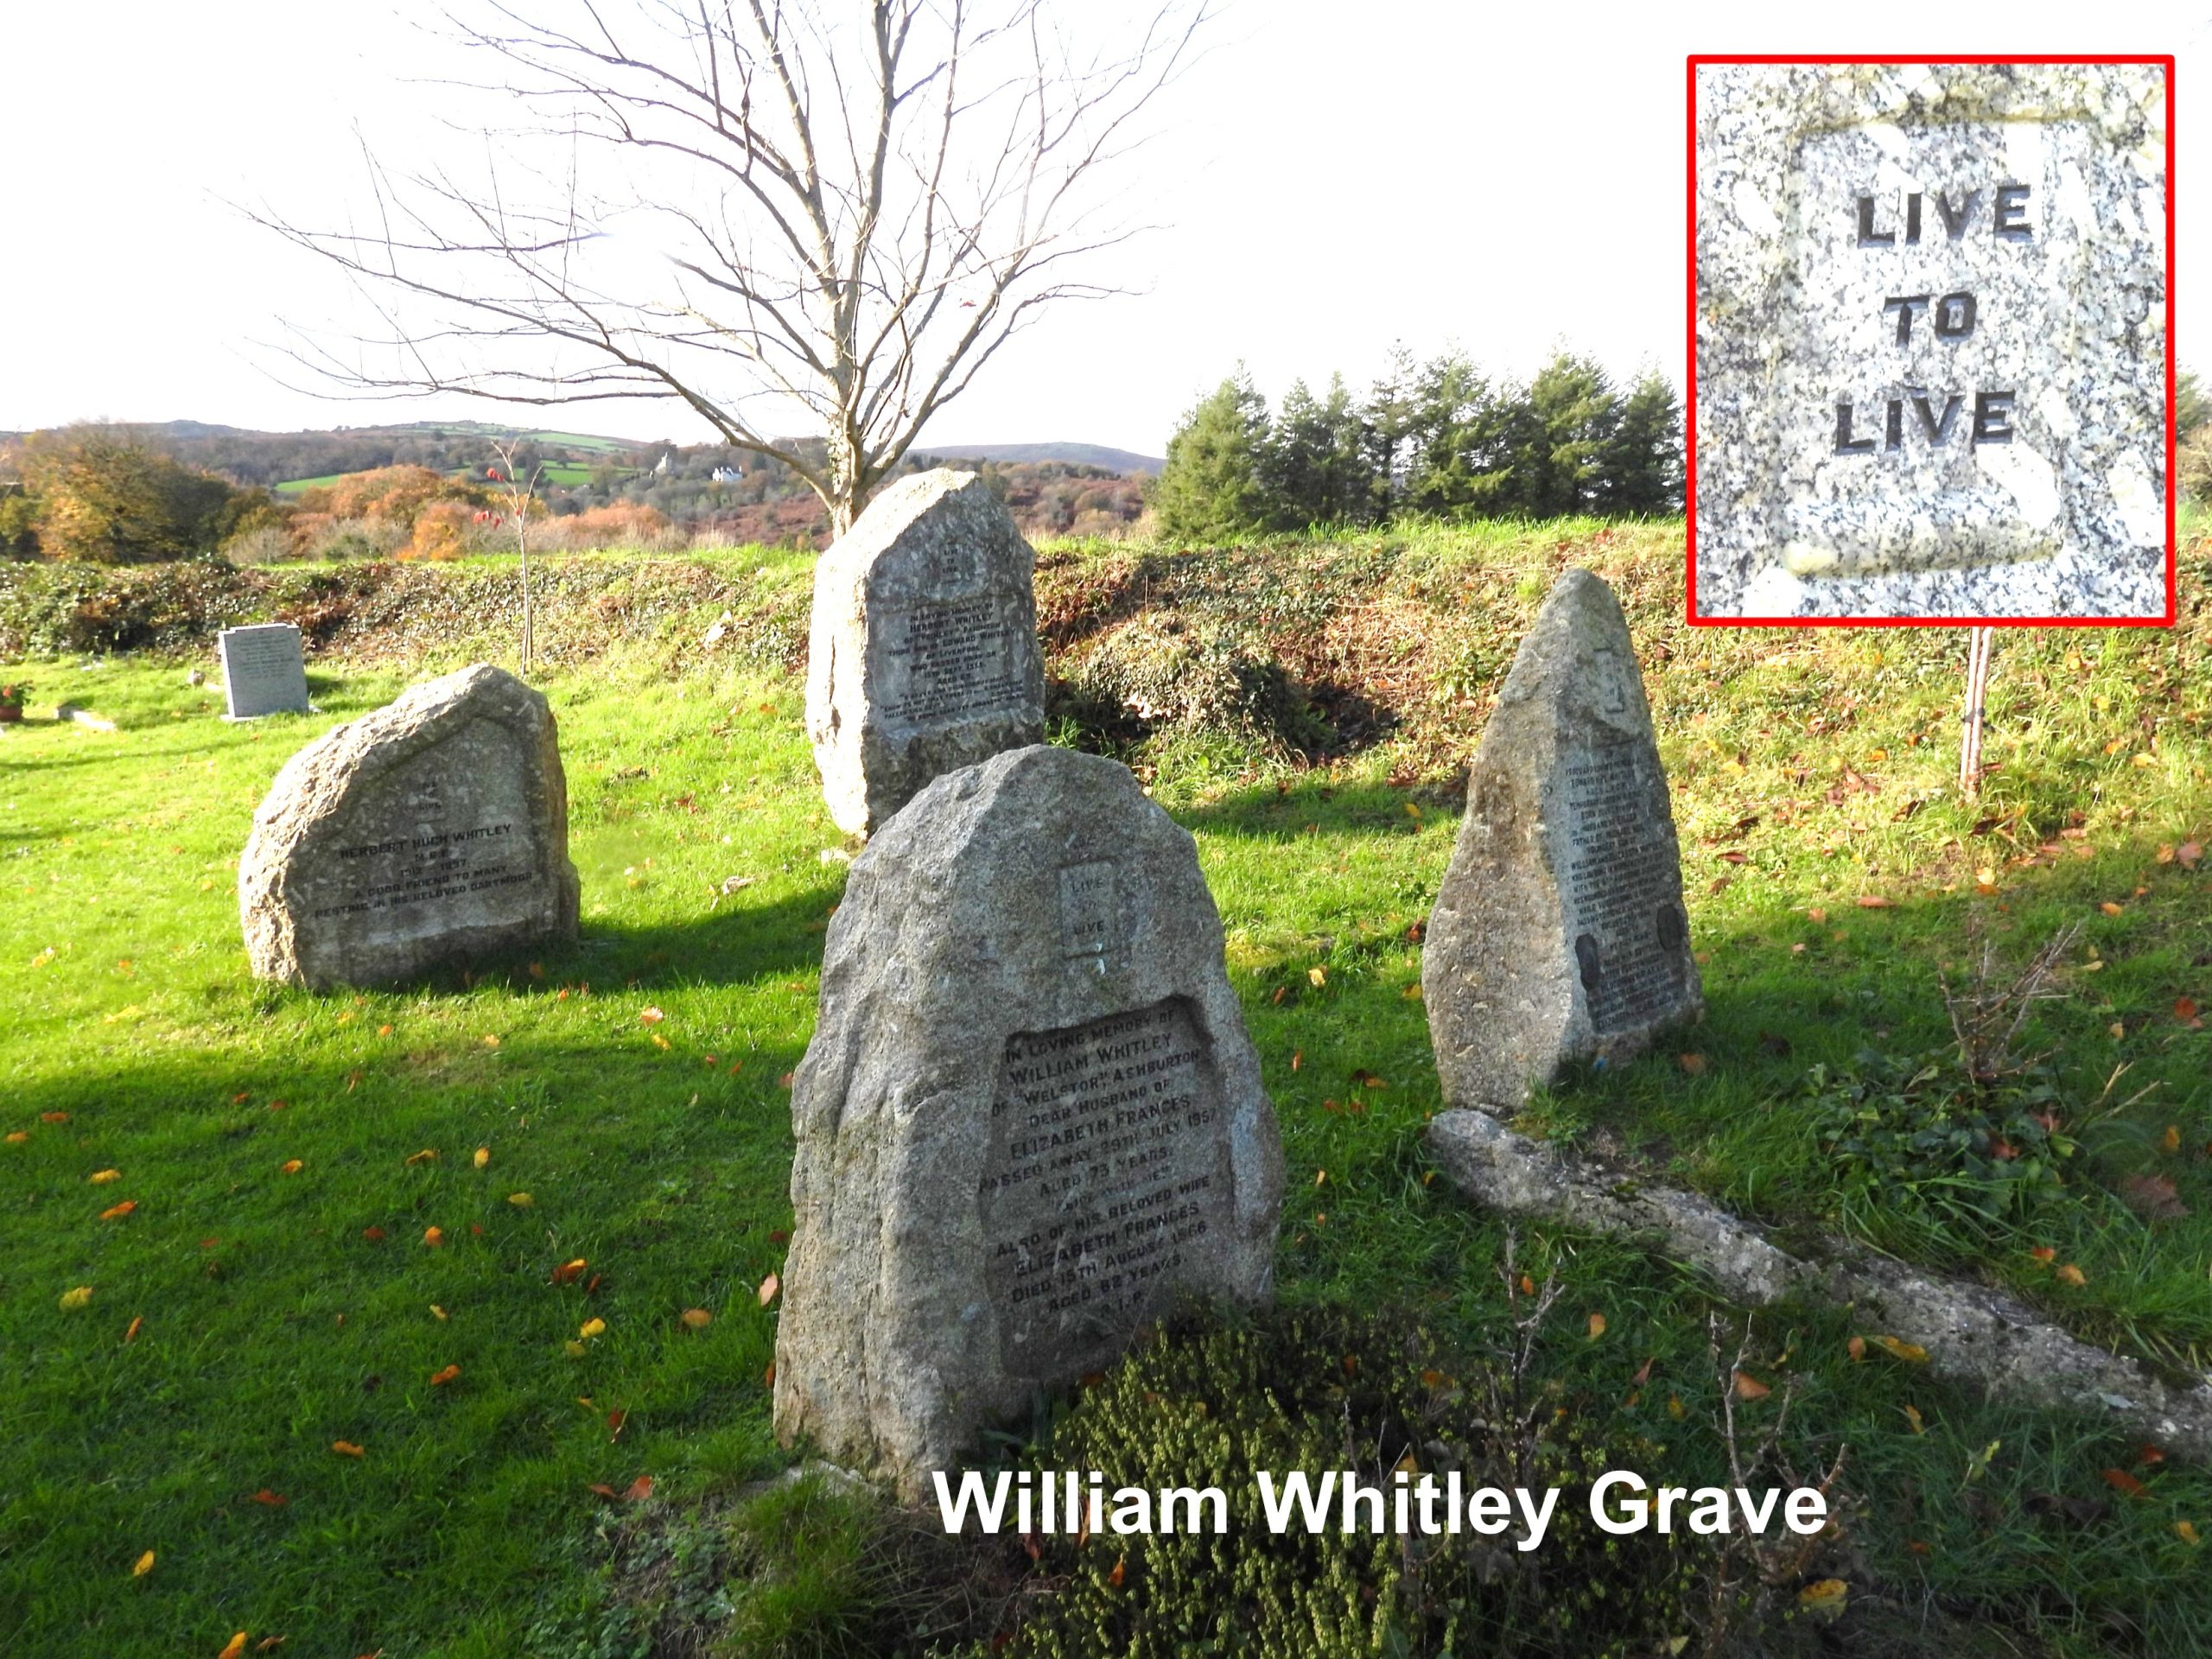 3. William Whitley Grave